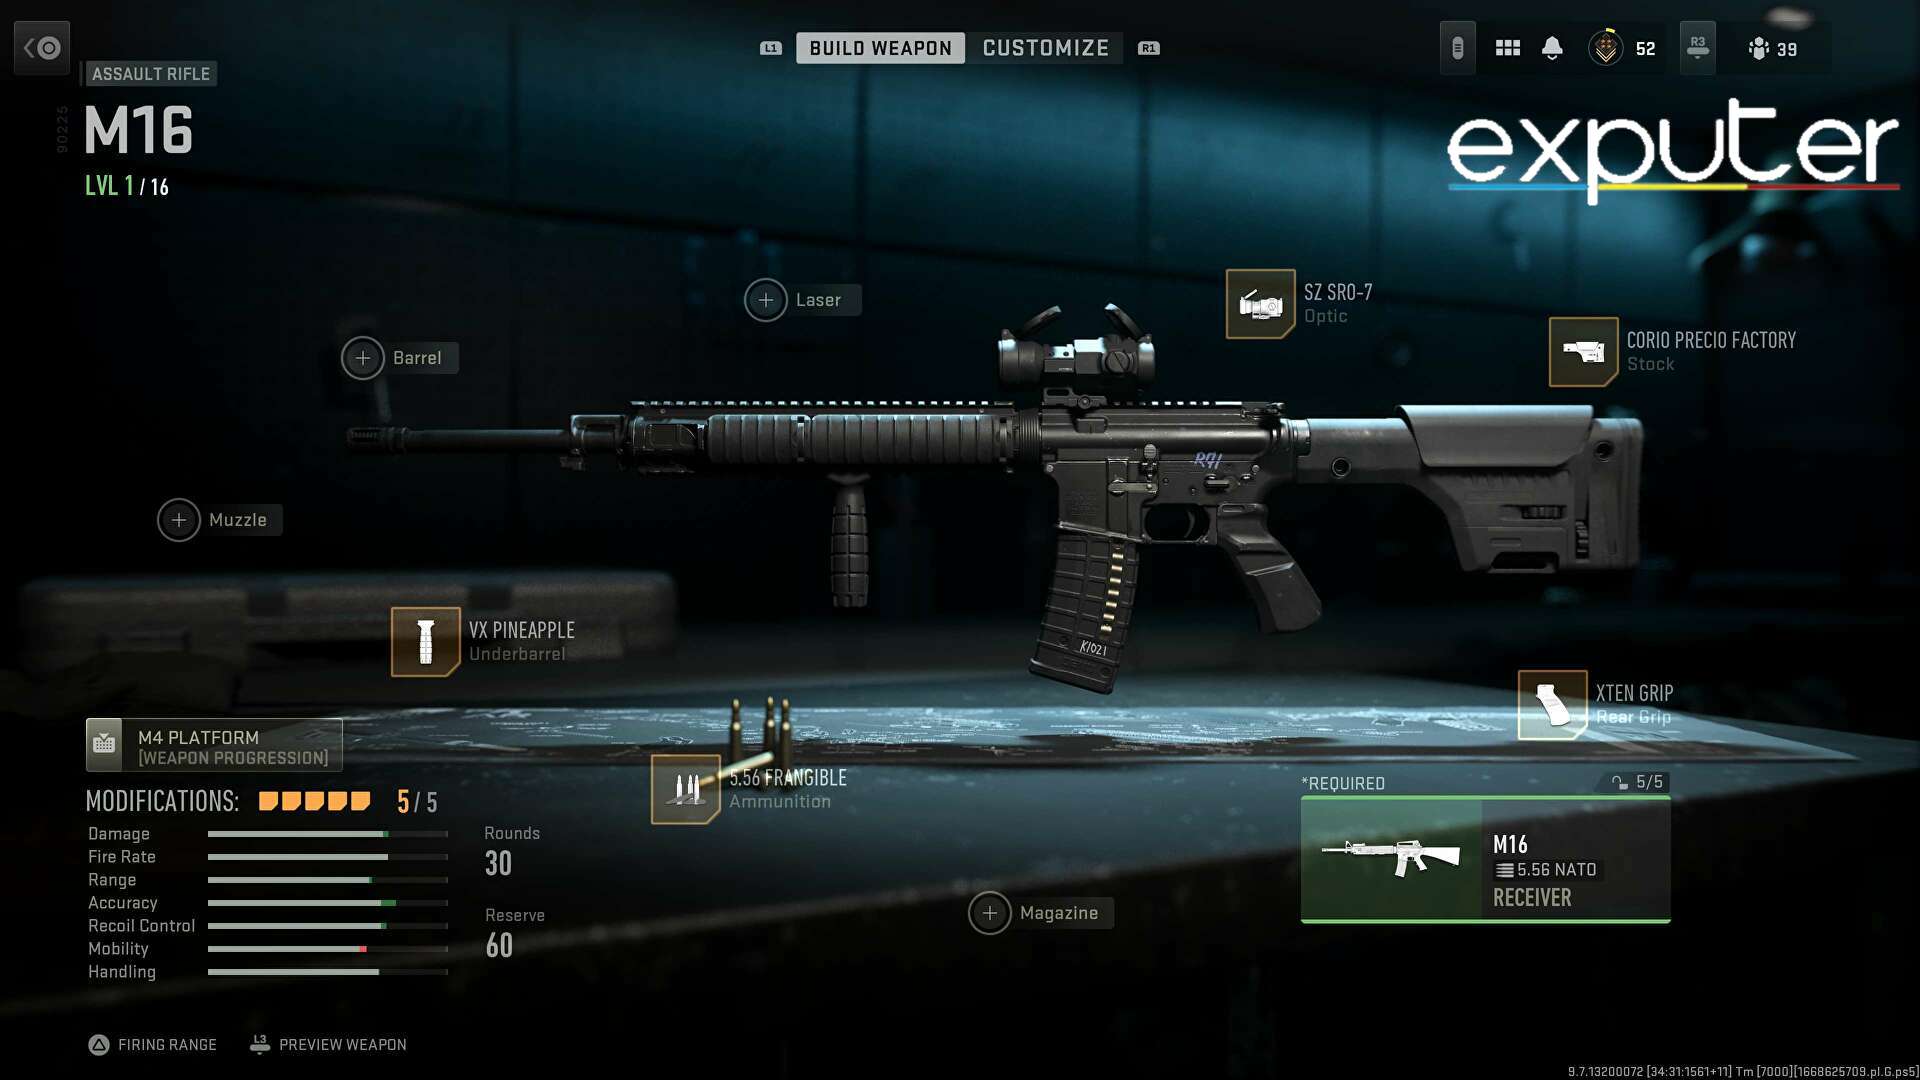 The best attachments for the M16 in COD Warzone 2.0.